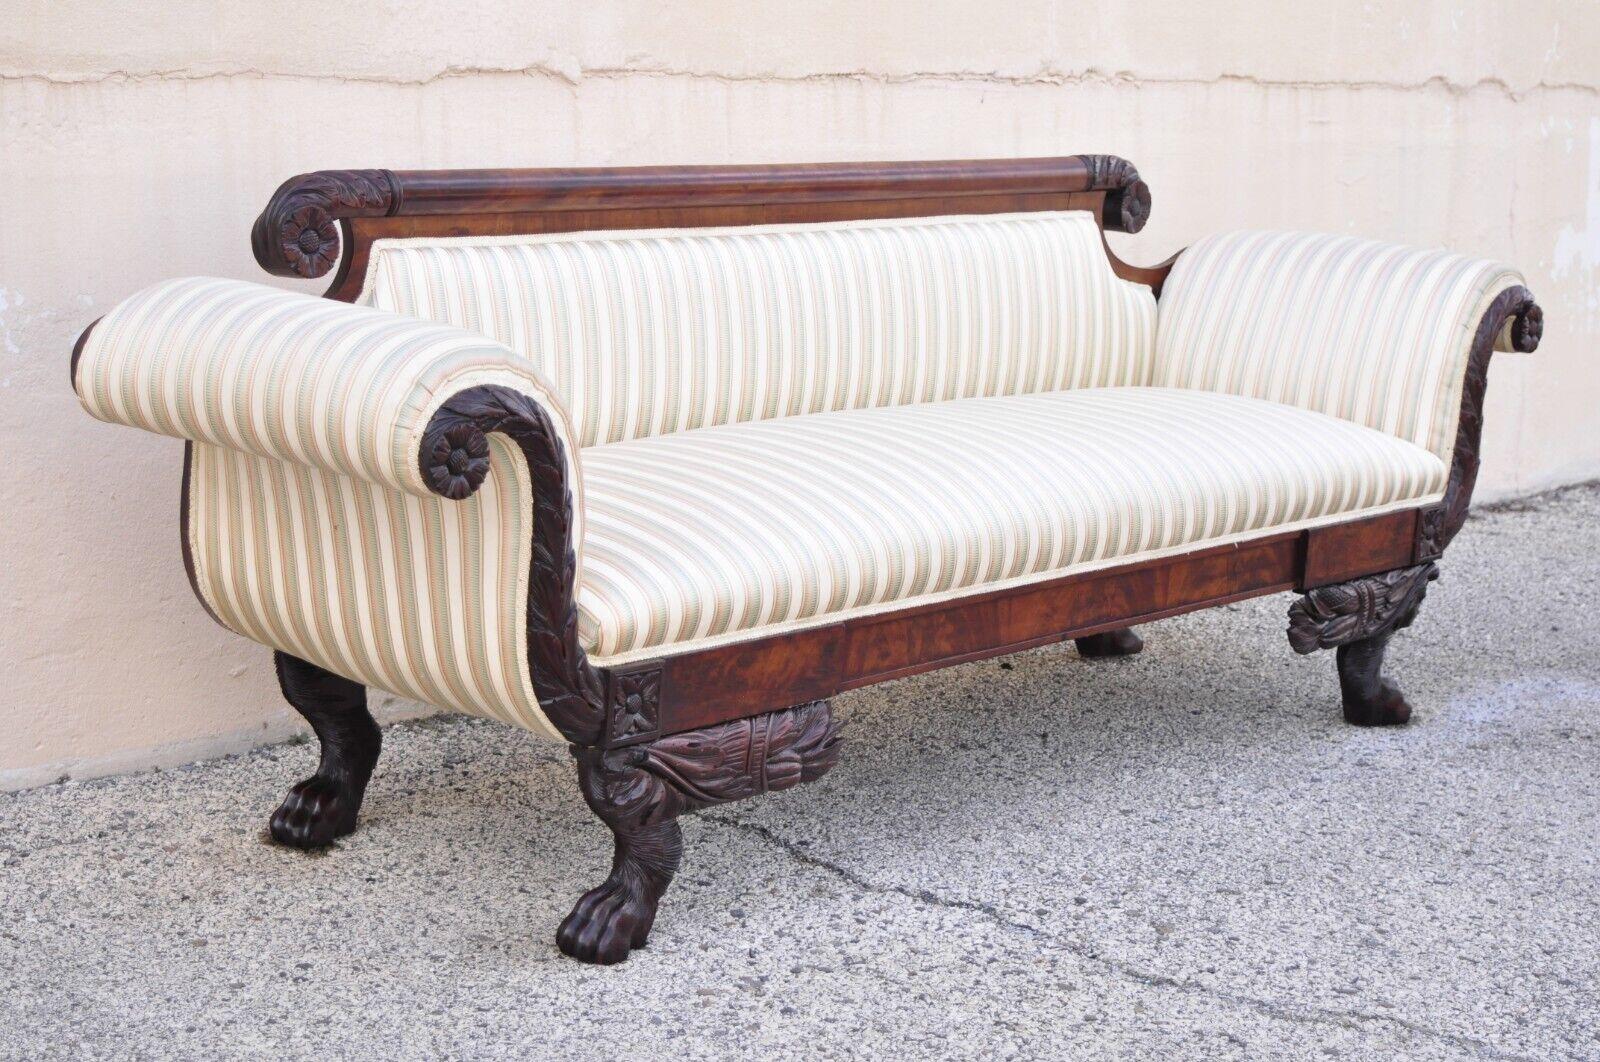 Antique American Empire Regency Mahogany Paw Feet Roll Arm Sofa. Item features hairy paw feet, carved leafy scrolls, rolled arms, solid wood frame, nicely carved details, very nice antique item. Circa 19th Century. Measurements: 31.5